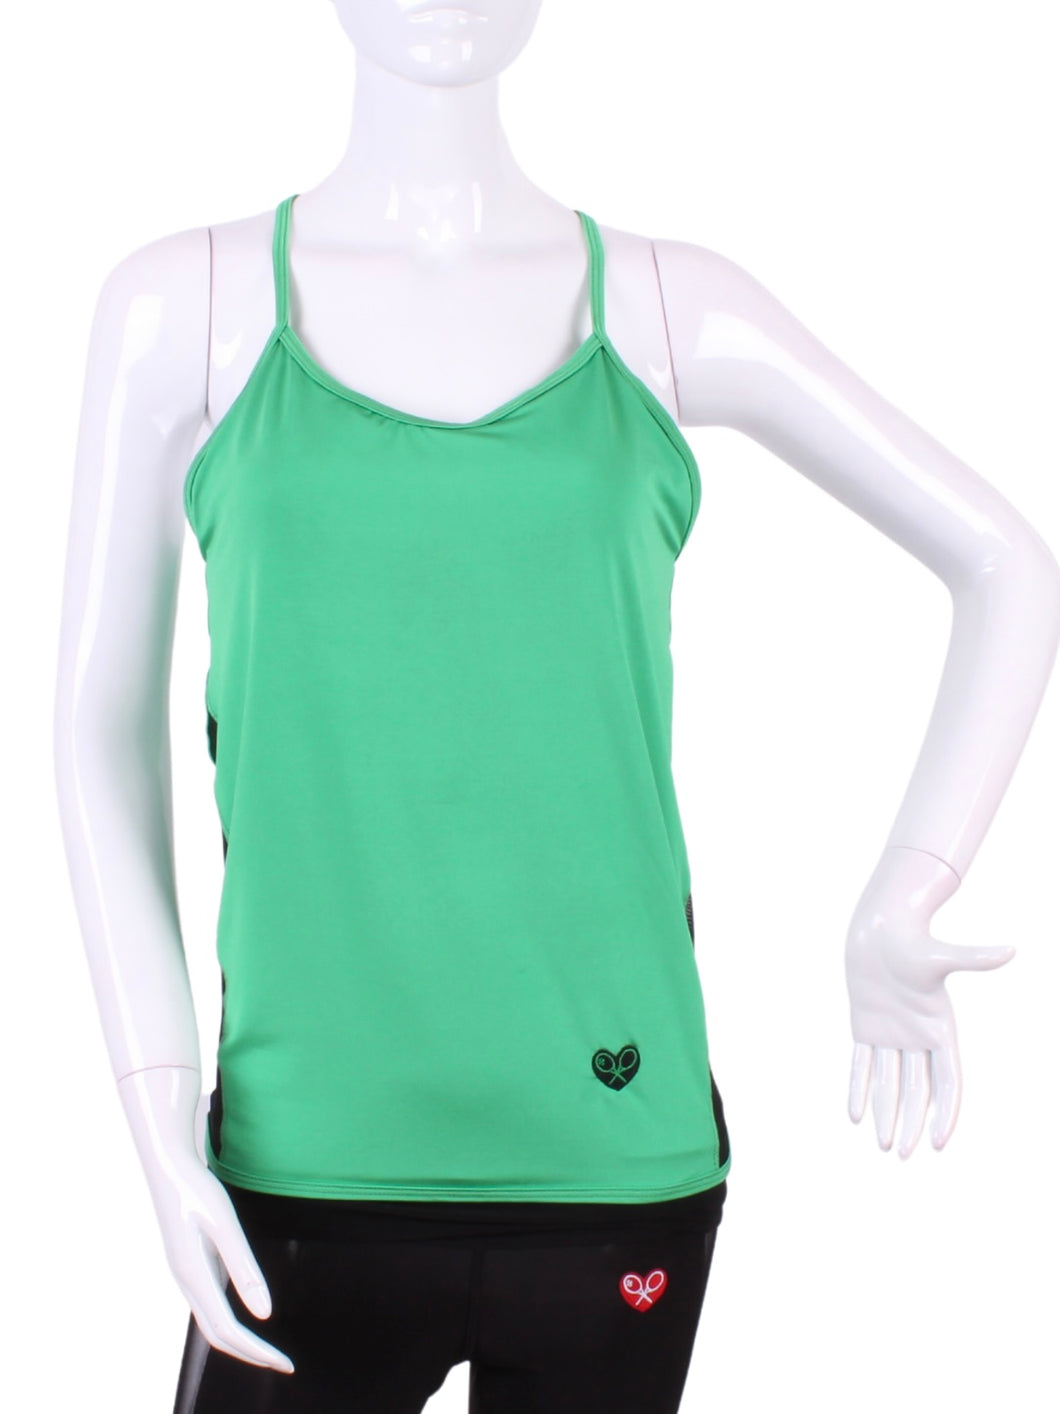 This is my top with the least coverage.  Aptly named the Tiny Tank!  It has a deep scoop neckline and strappy cross back. (If you have boobs....it WILL show your sports bra - if you wear one that is....)  Very light and cool - this top is for a tennis player who either doesn’t wear a sports bra OR wears one under.  This top is not supportive.  It’s more of a feather draping over your chest!